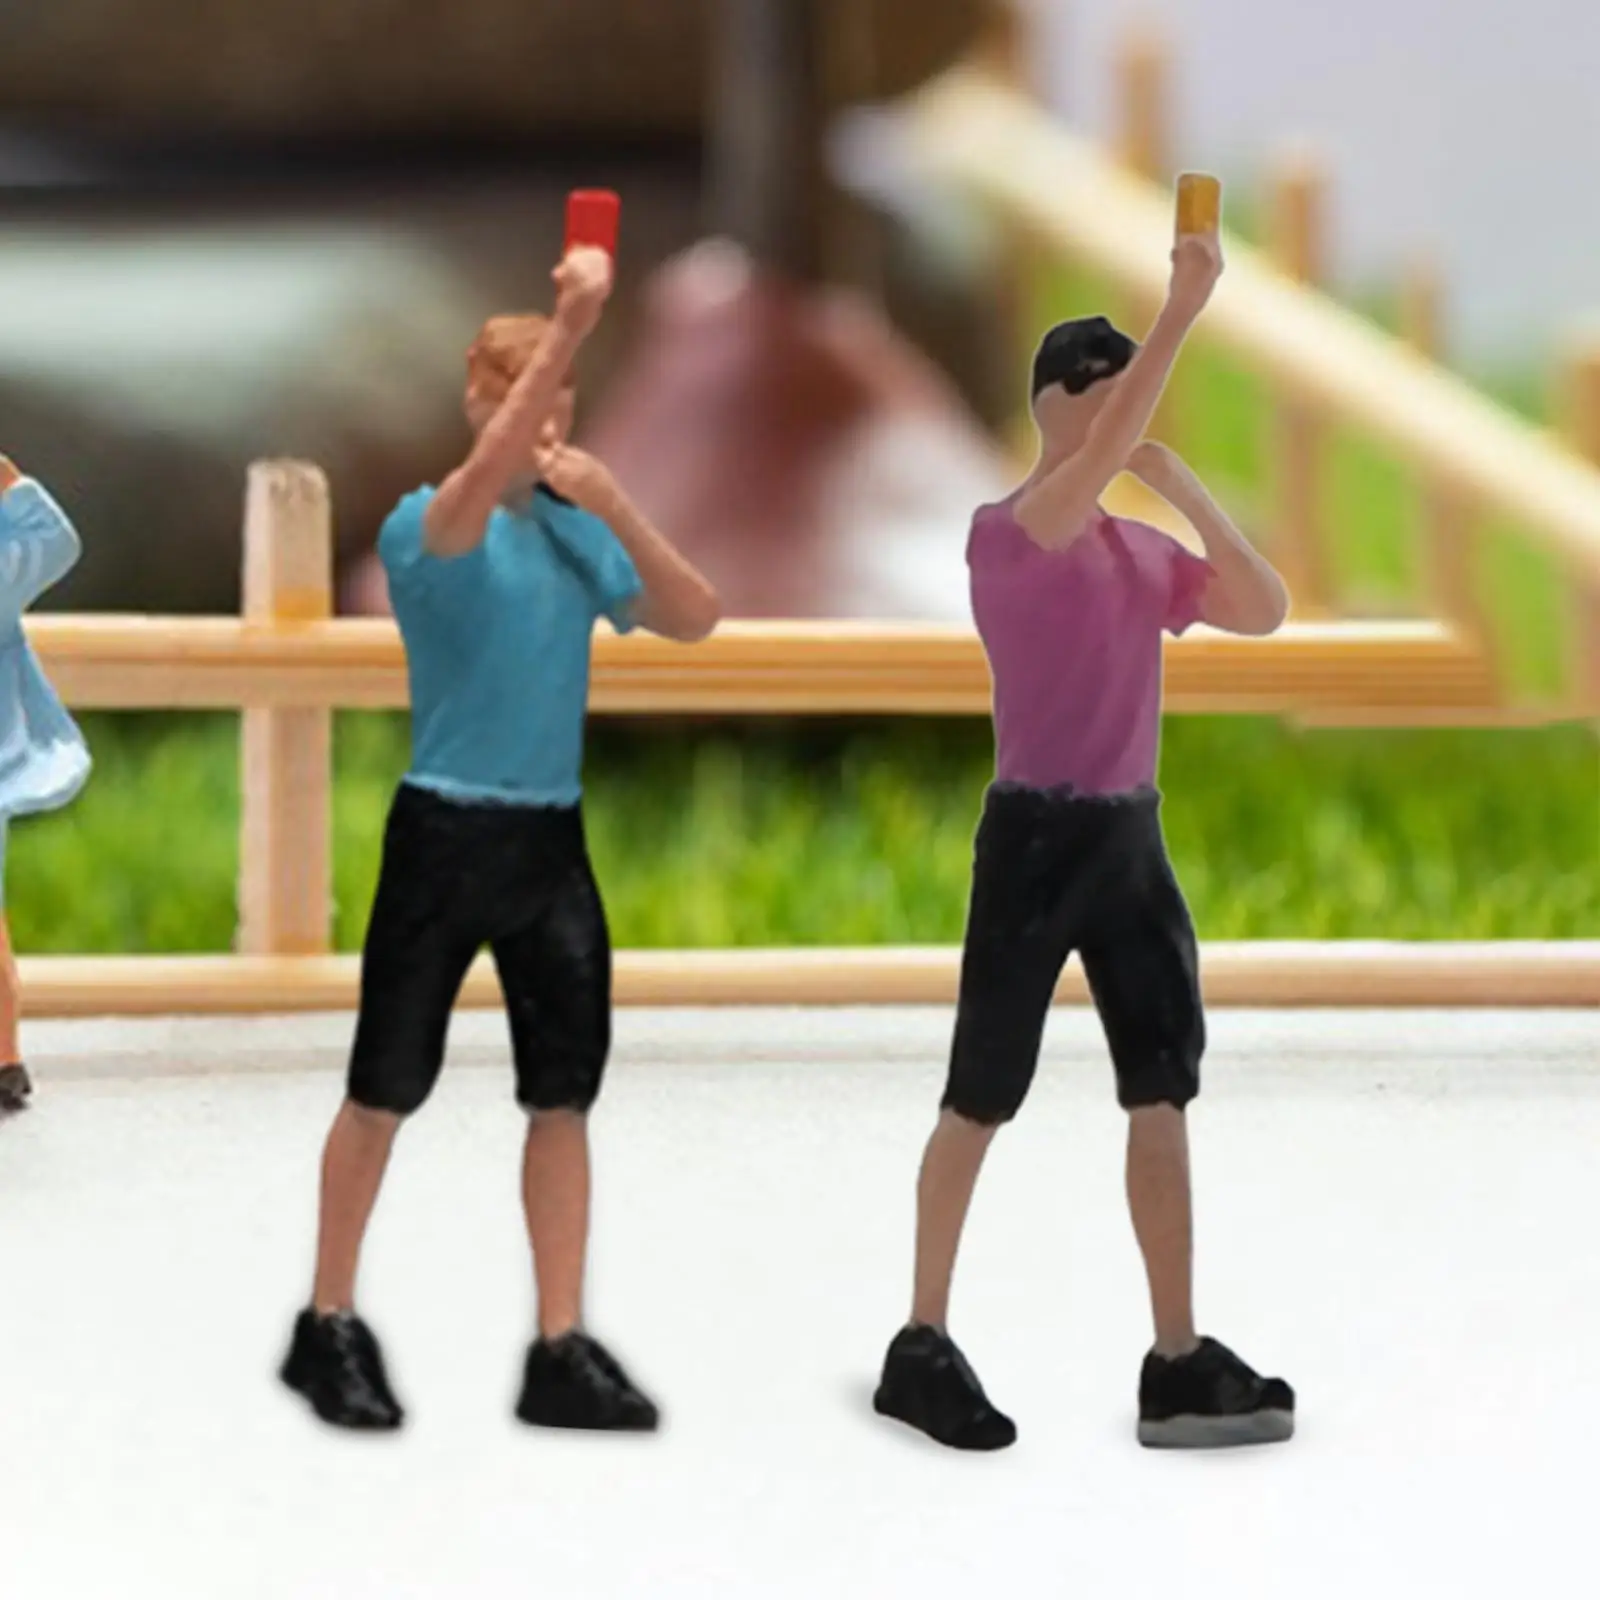 1:64 People Figures Sand Table Ornament DIY Crafts Miniature Referee Figurines for Micro Landscapes Photography Props Decoration